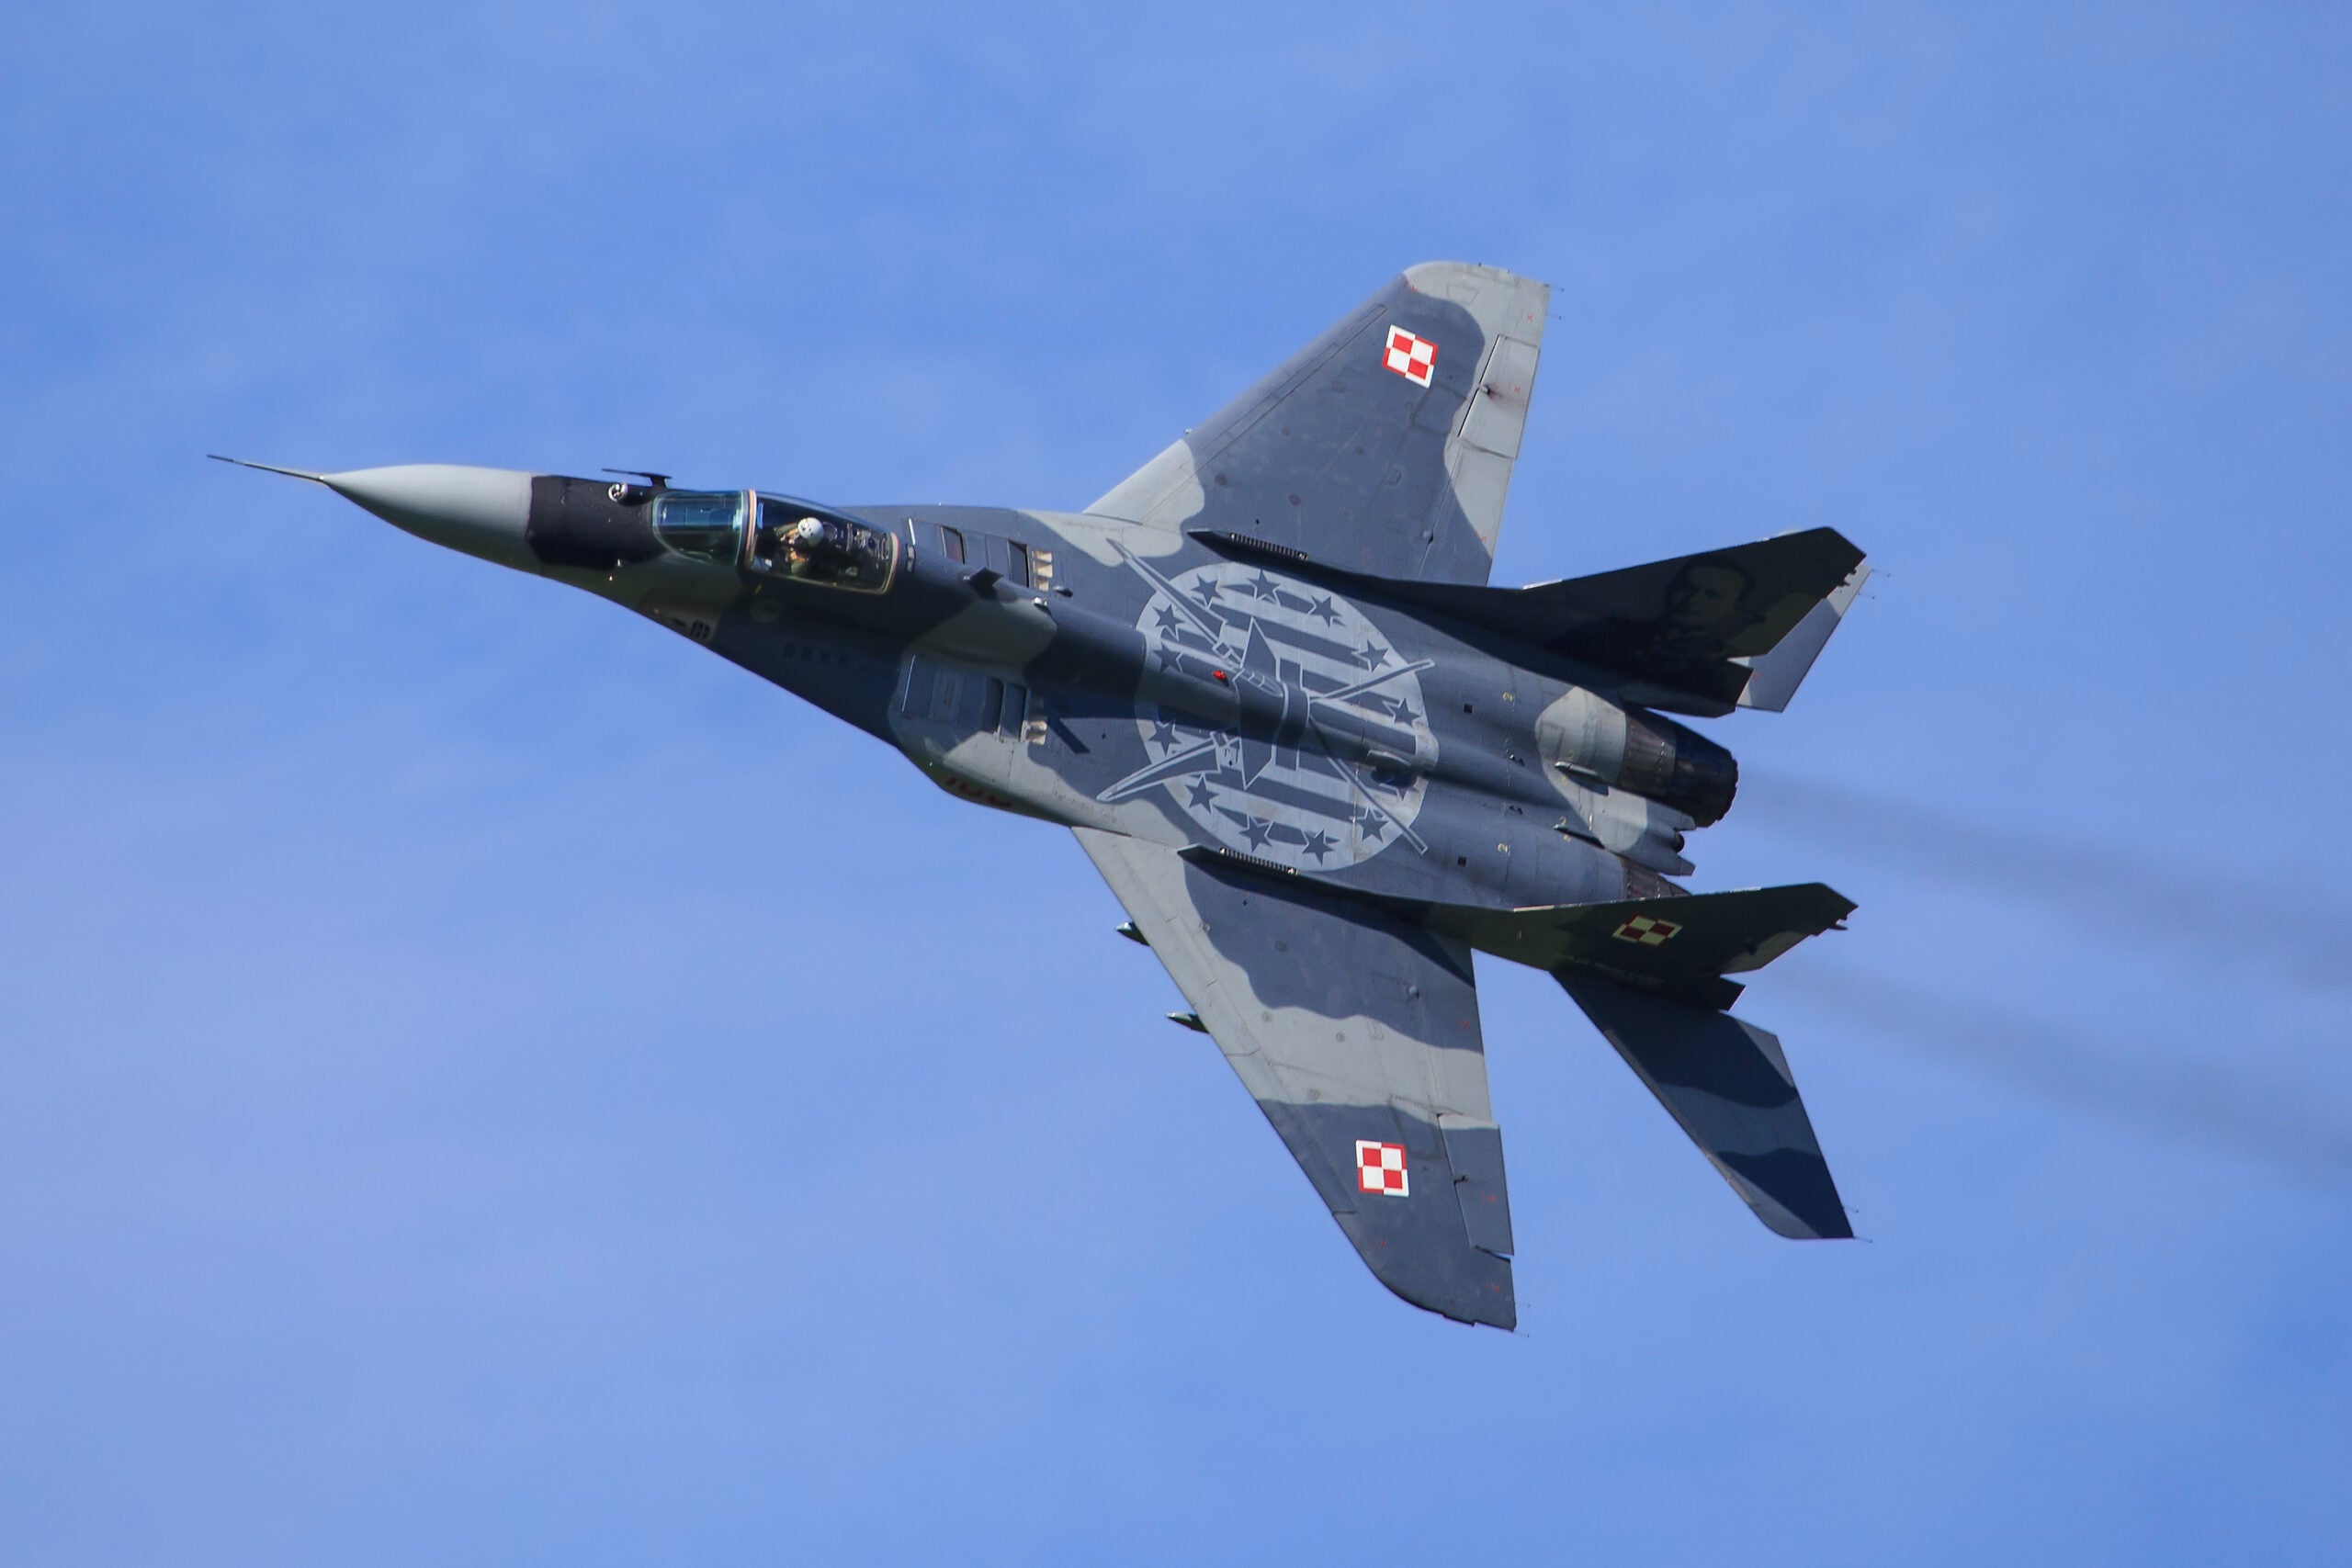 Poland Offers MiG-29 Fighters to Ukraine, U.S. Deems Deal Untenable